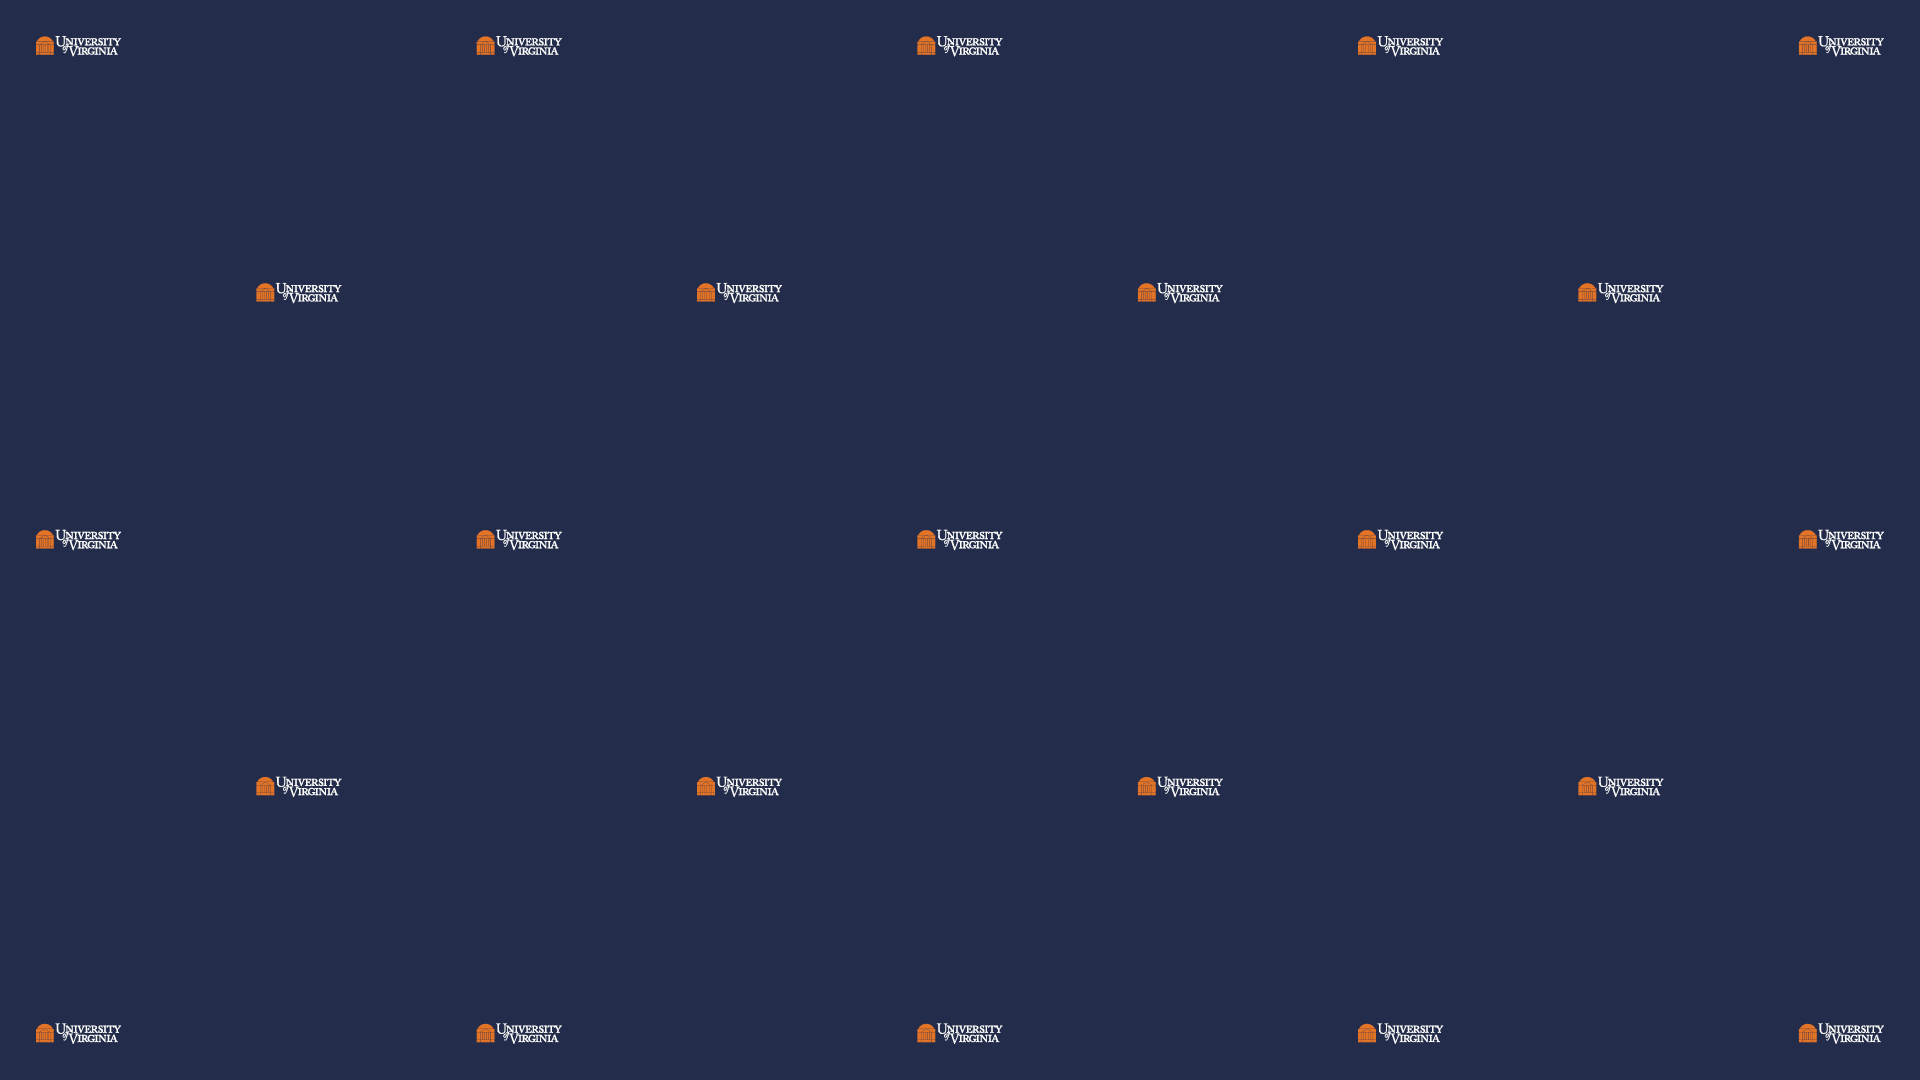 Blue background with UVA logo evenly spaced out on it